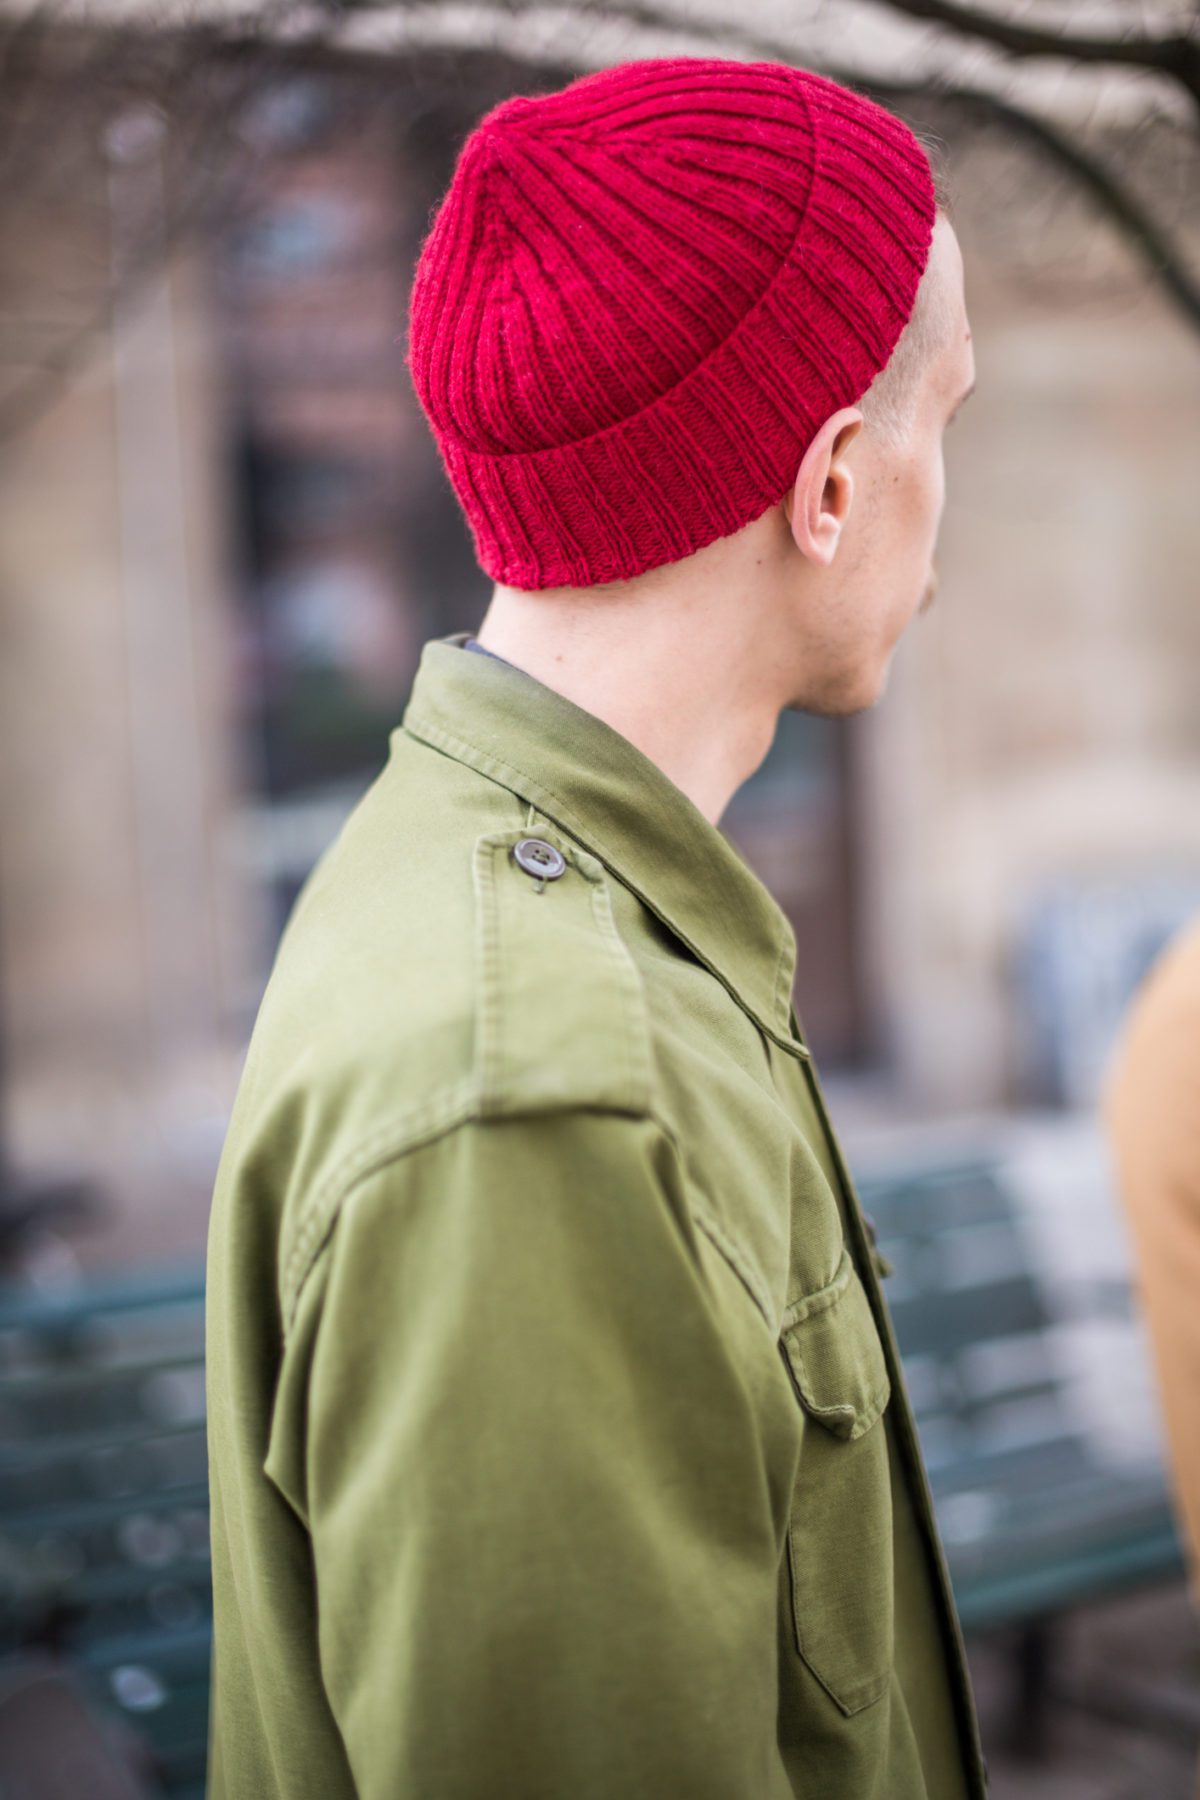 How to wear your red cap: Single fold